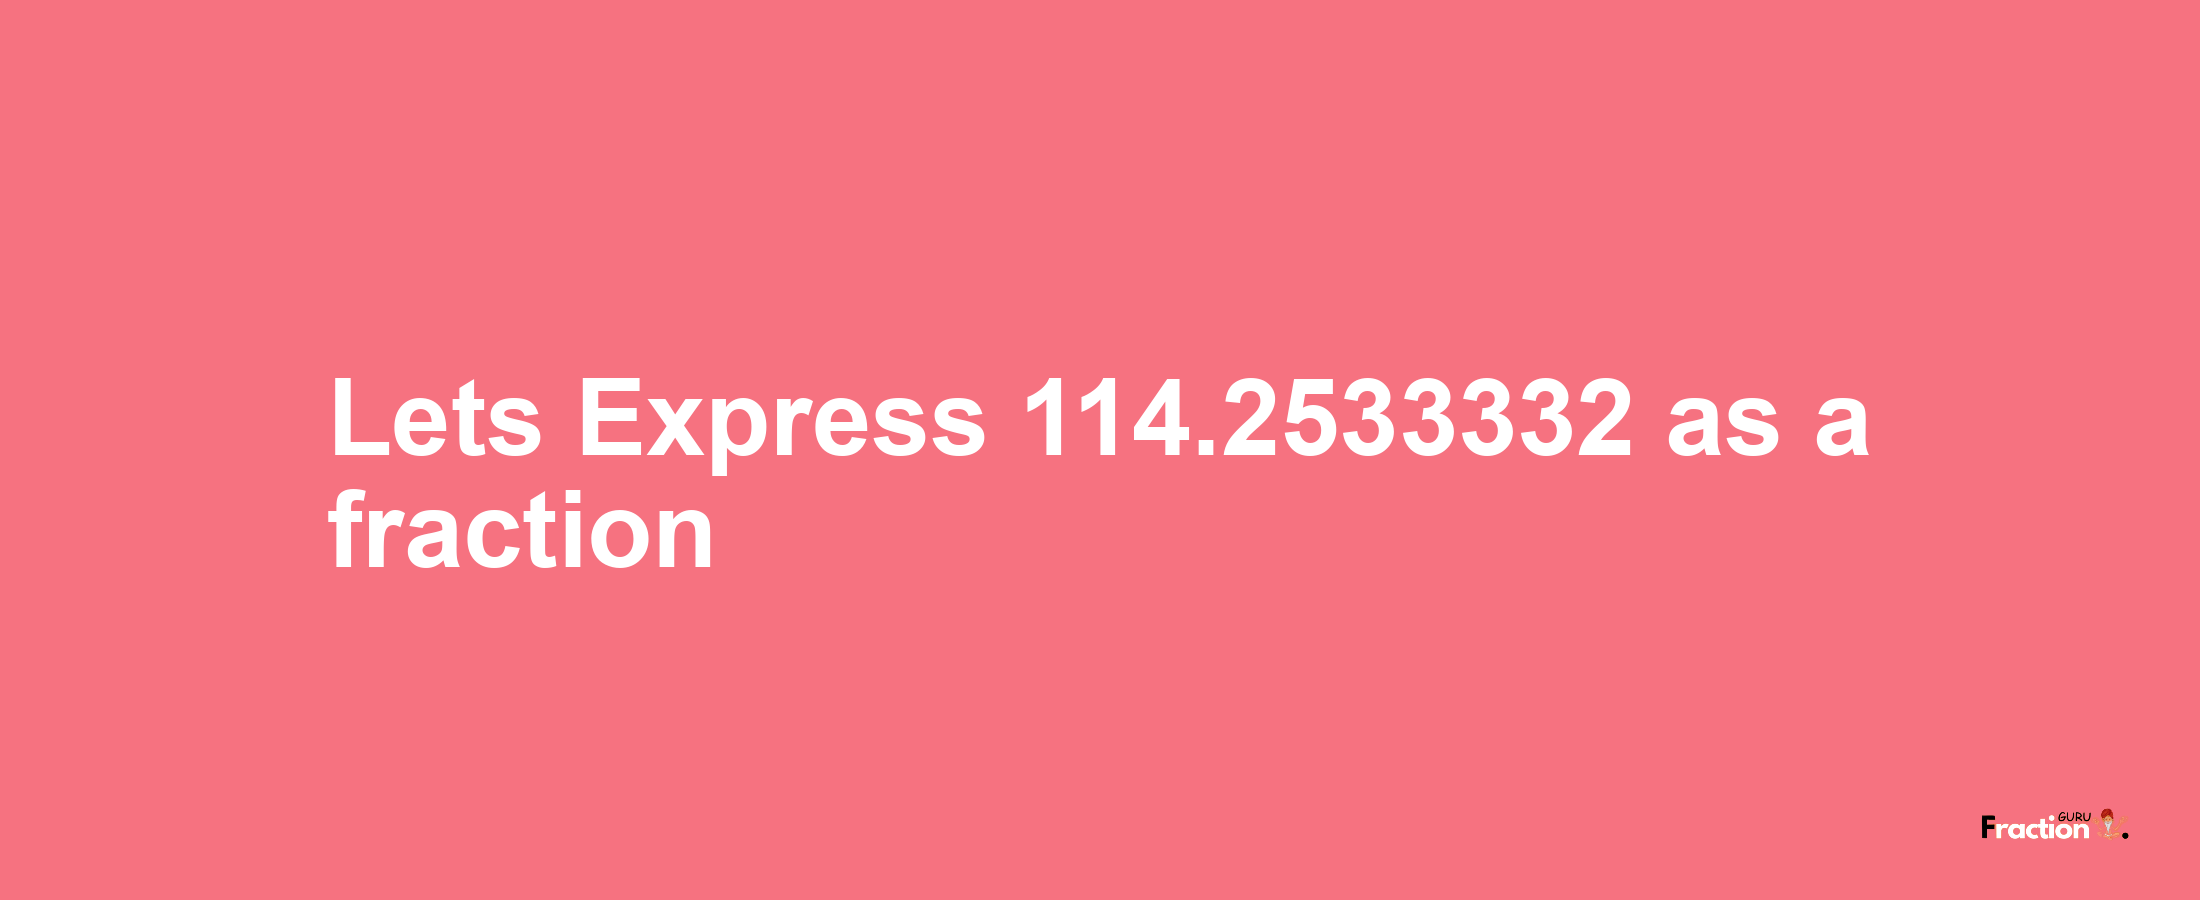 Lets Express 114.2533332 as afraction